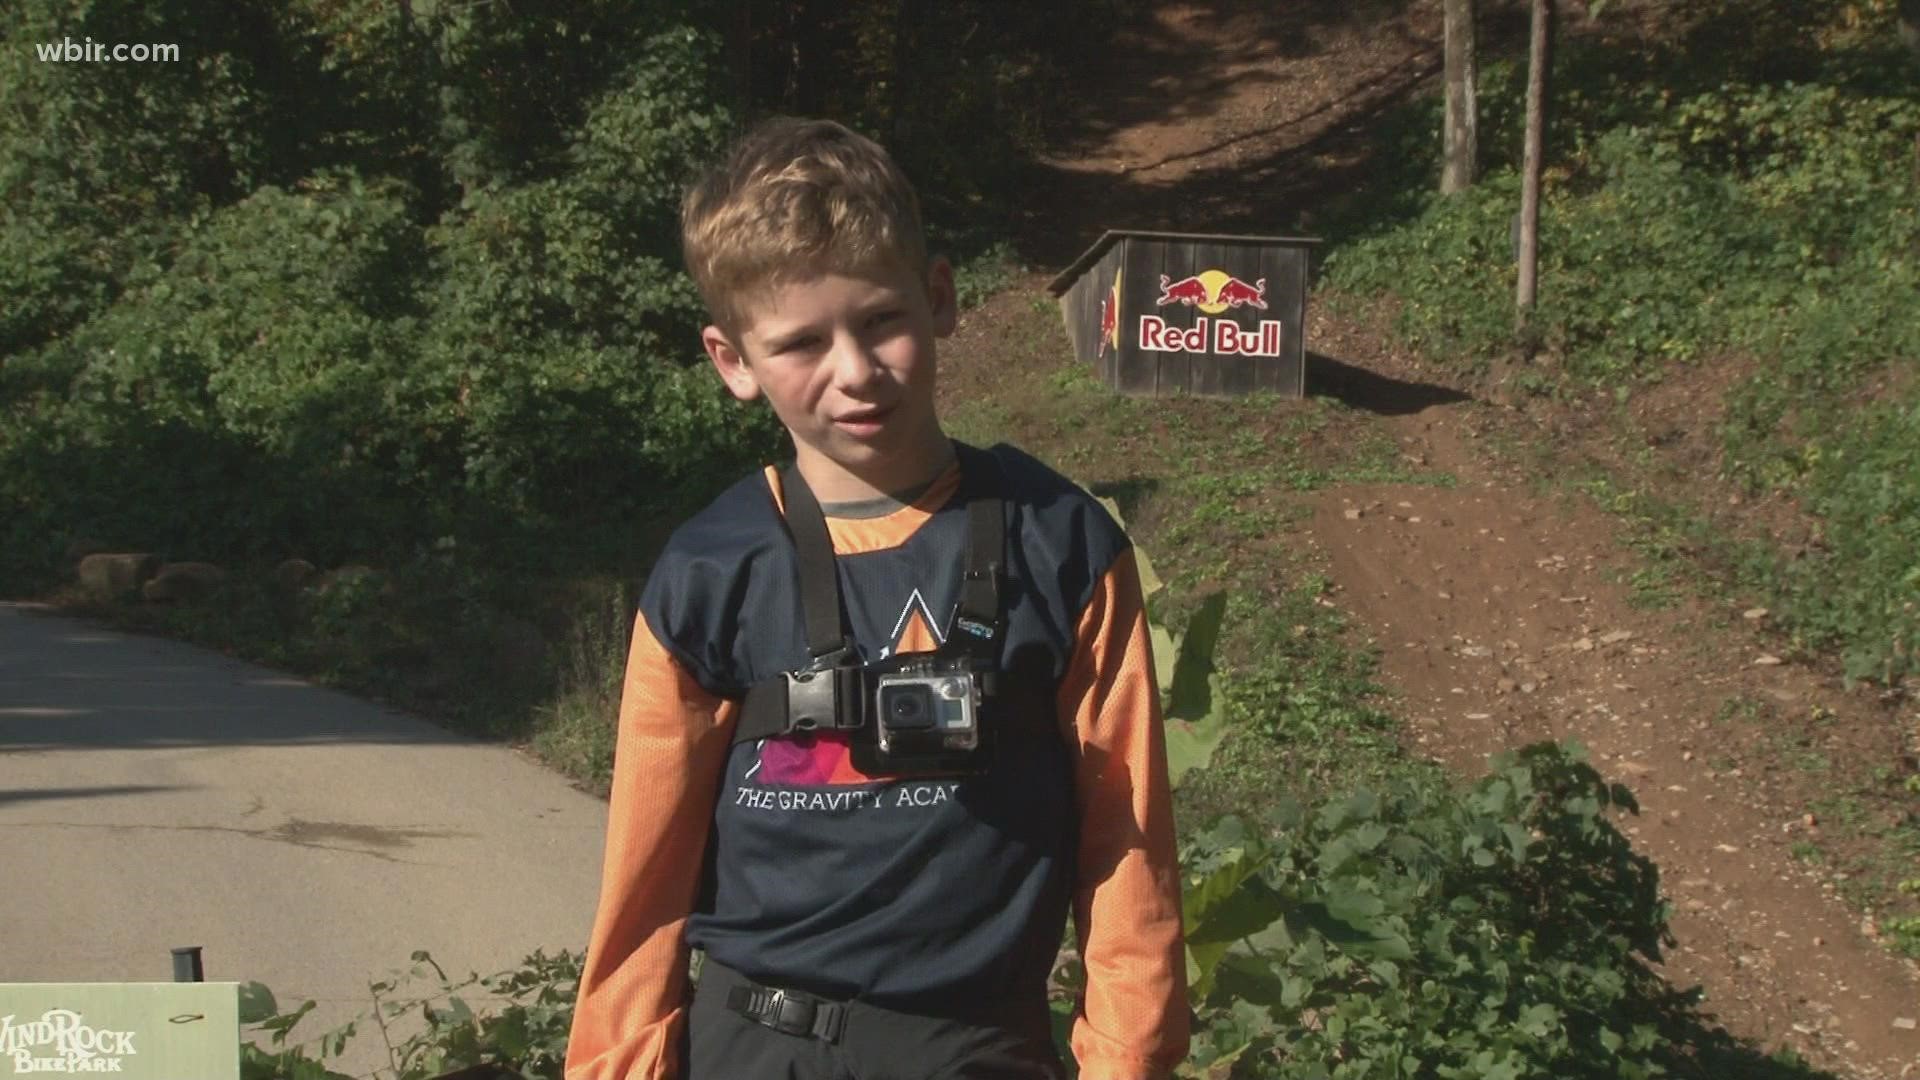 On most days you will find one 12-year-old Knoxville boy, not on the baseball field or playing video games, but high on a mountain top on two wheels.